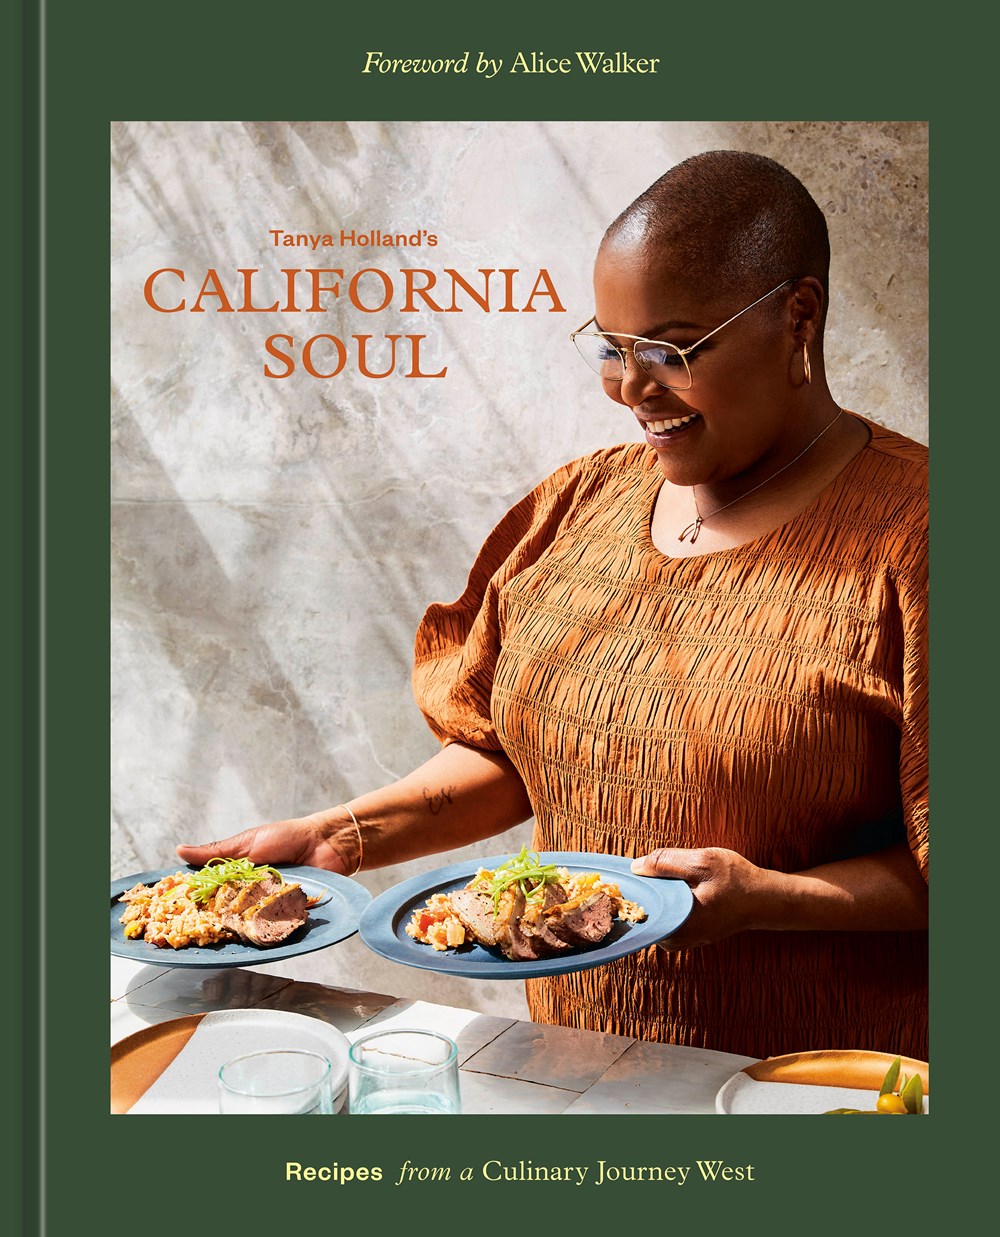 Tanya Holland’s California Soul: Recipes from a Culinary Journey West